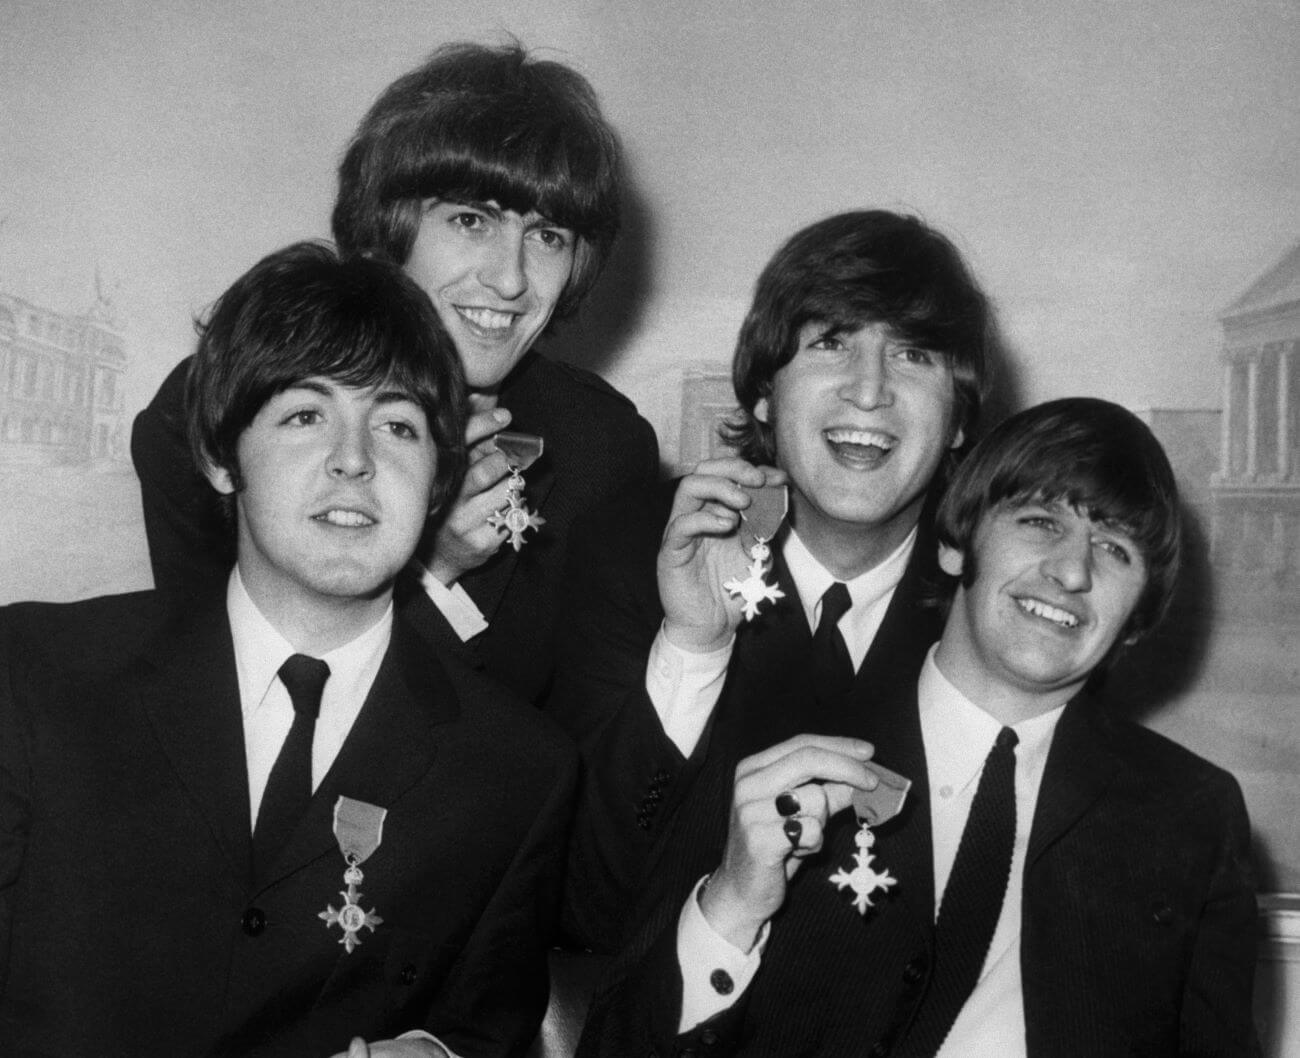 A black and white picture of The Beatles smiling as they hold up their MBEs.